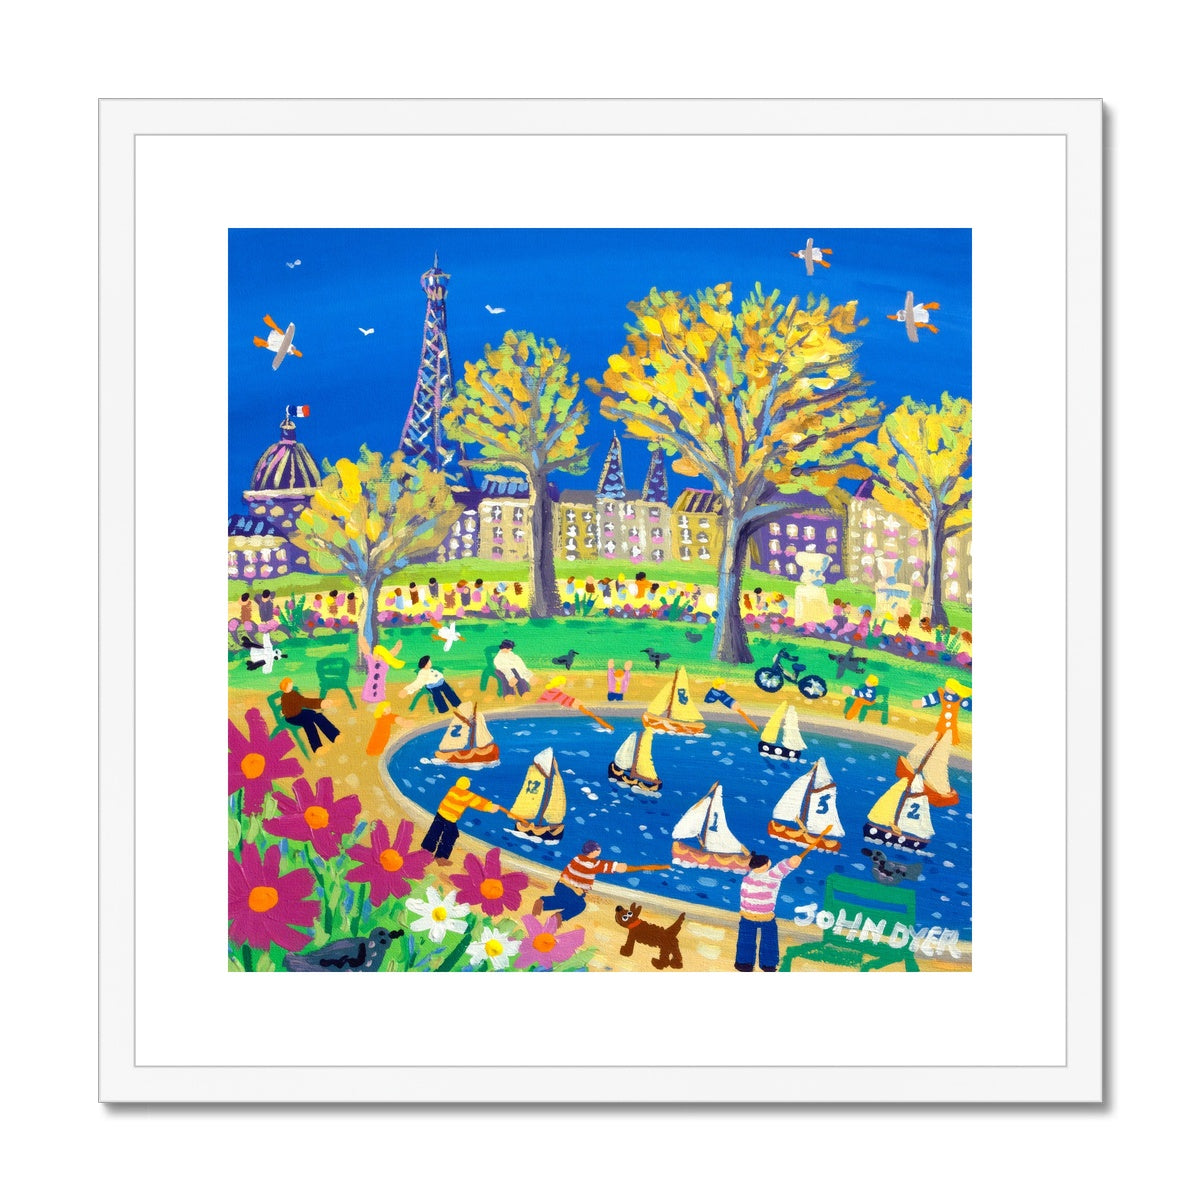 John Dyer Framed Open Edition City Fine Art Print. 'Sunday Afternoon in the Park, Paris, France'. French Art Gallery